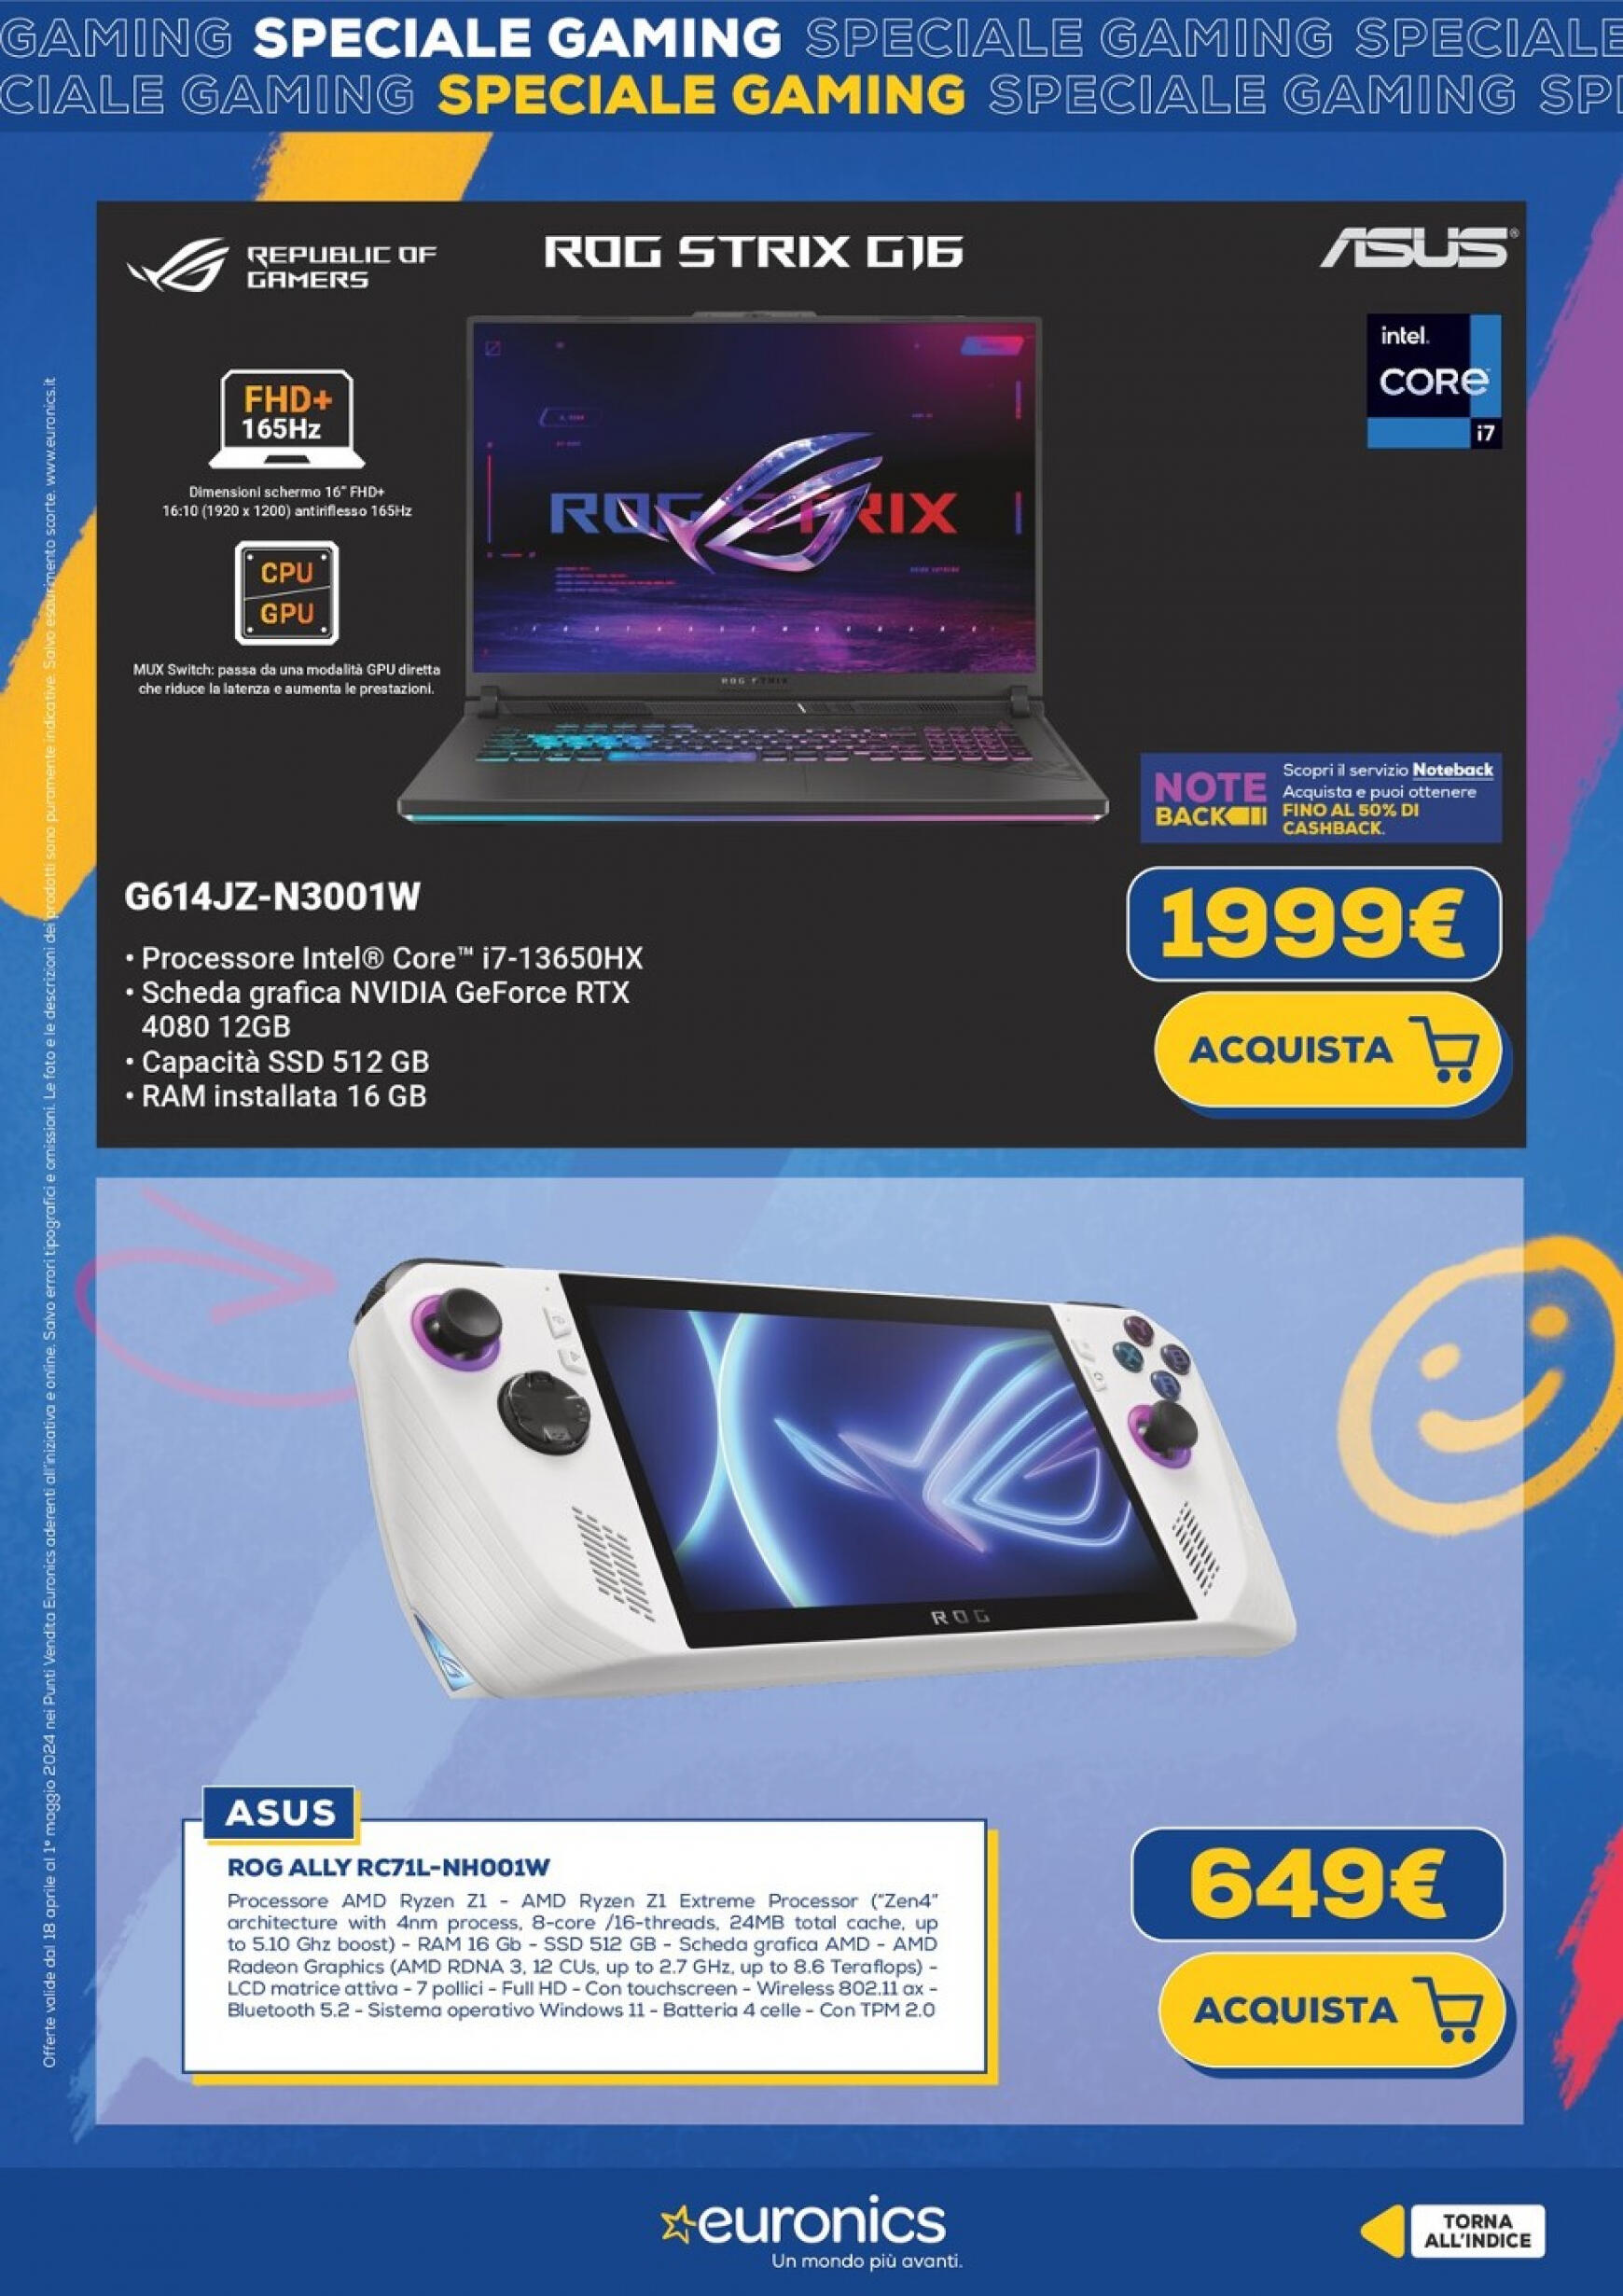 euronics - Nuovo volantino Euronics - Speciale Gaming 18.04. - 01.05. - page: 10